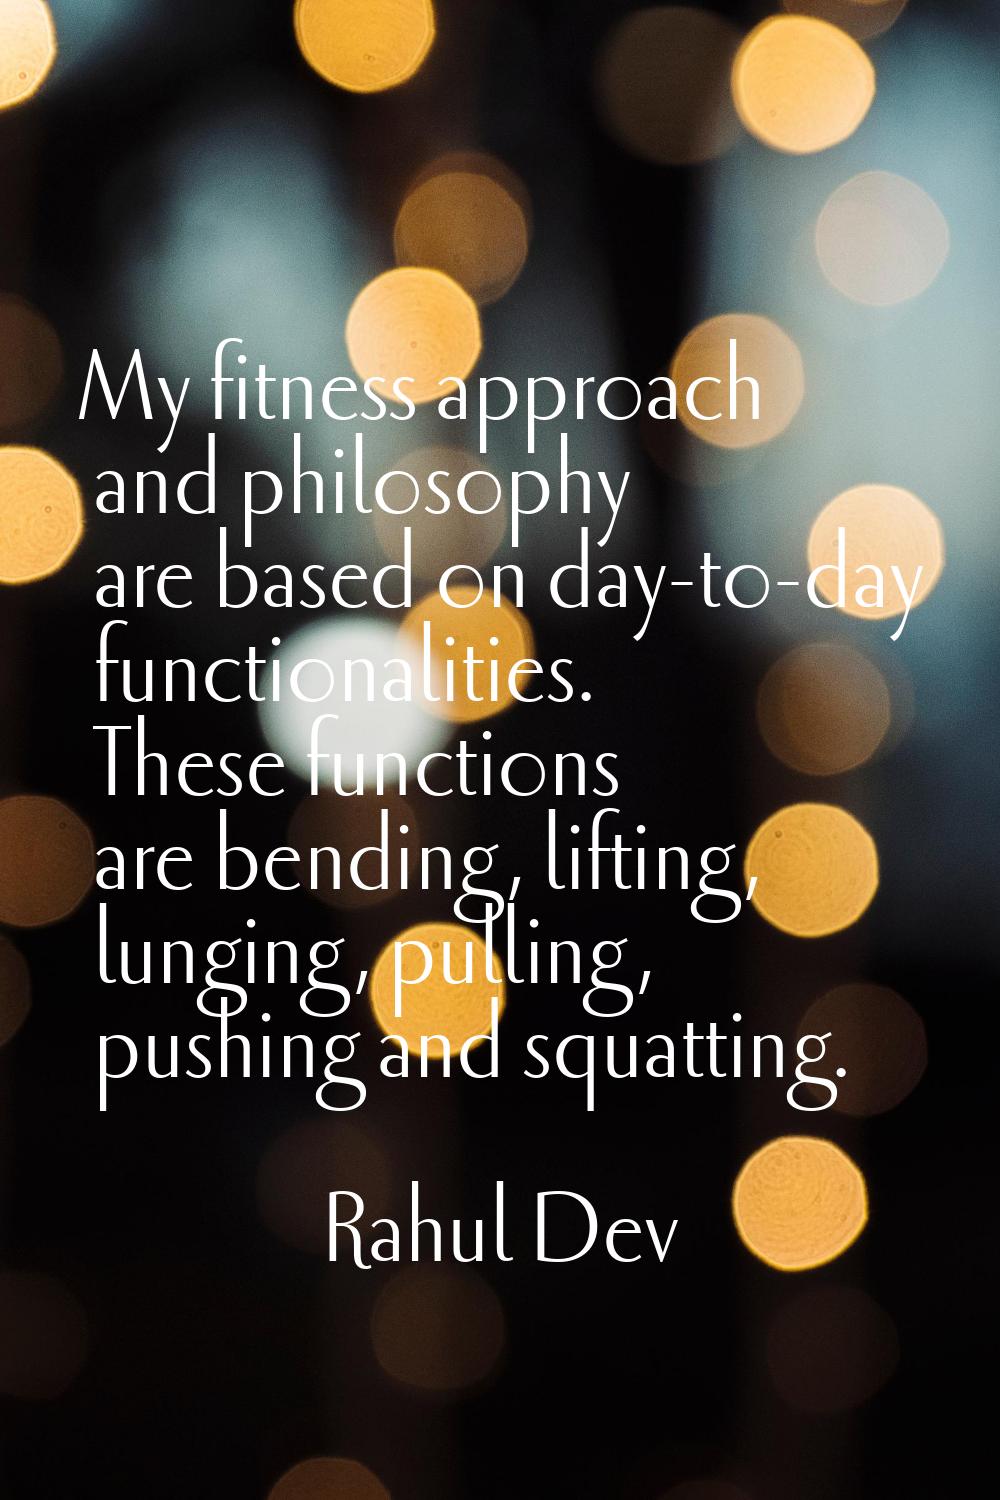 My fitness approach and philosophy are based on day-to-day functionalities. These functions are ben